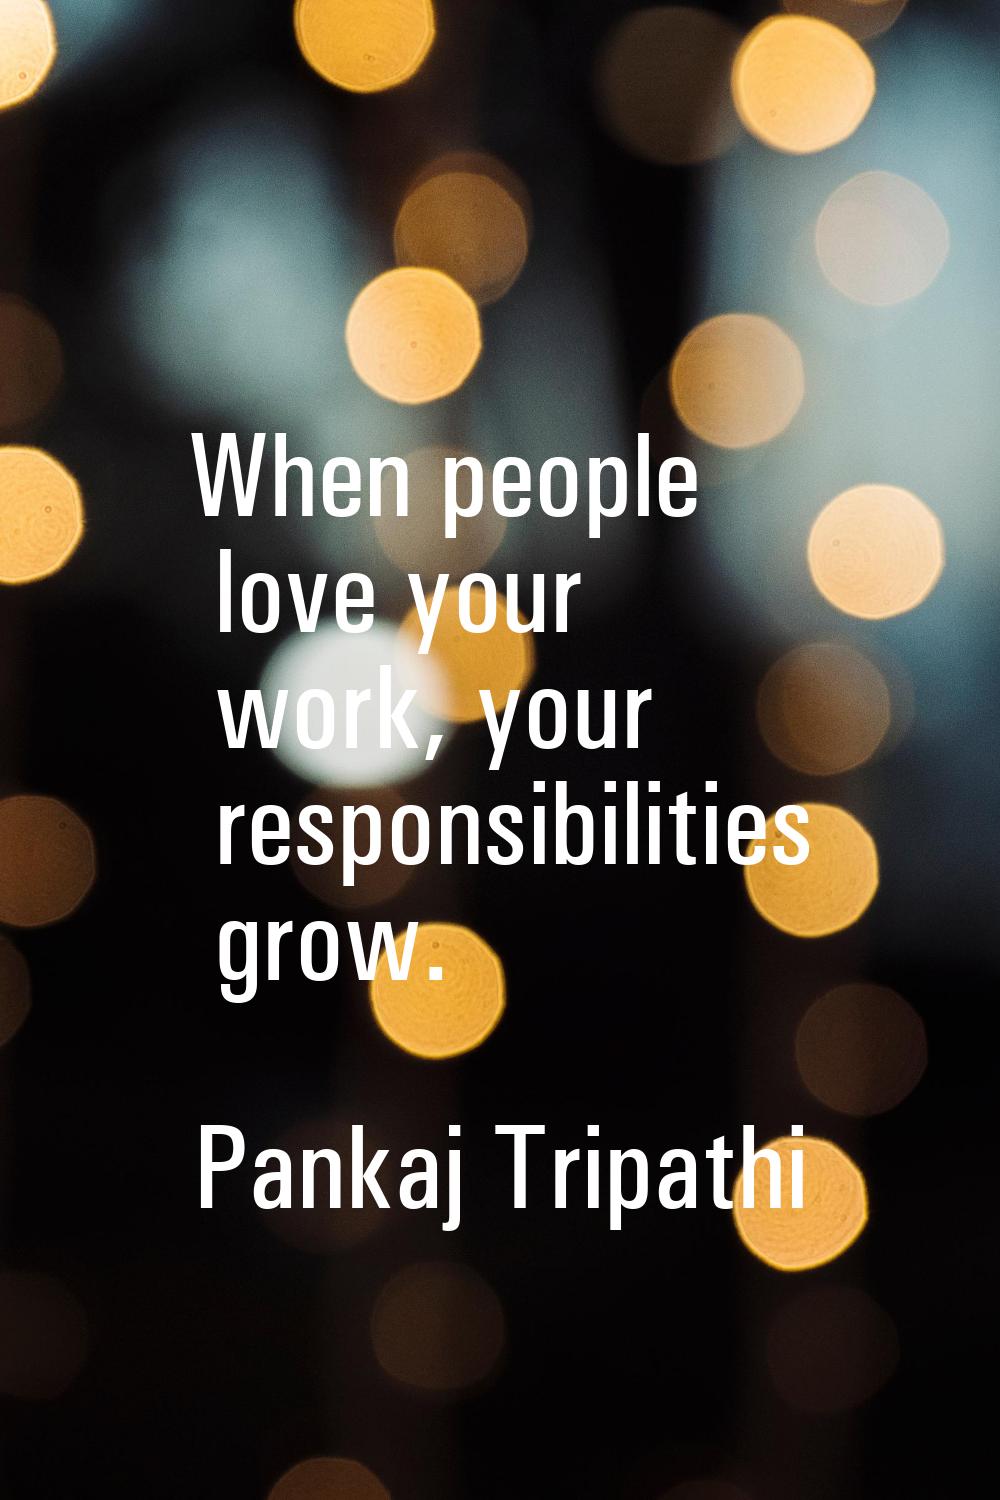 When people love your work, your responsibilities grow.